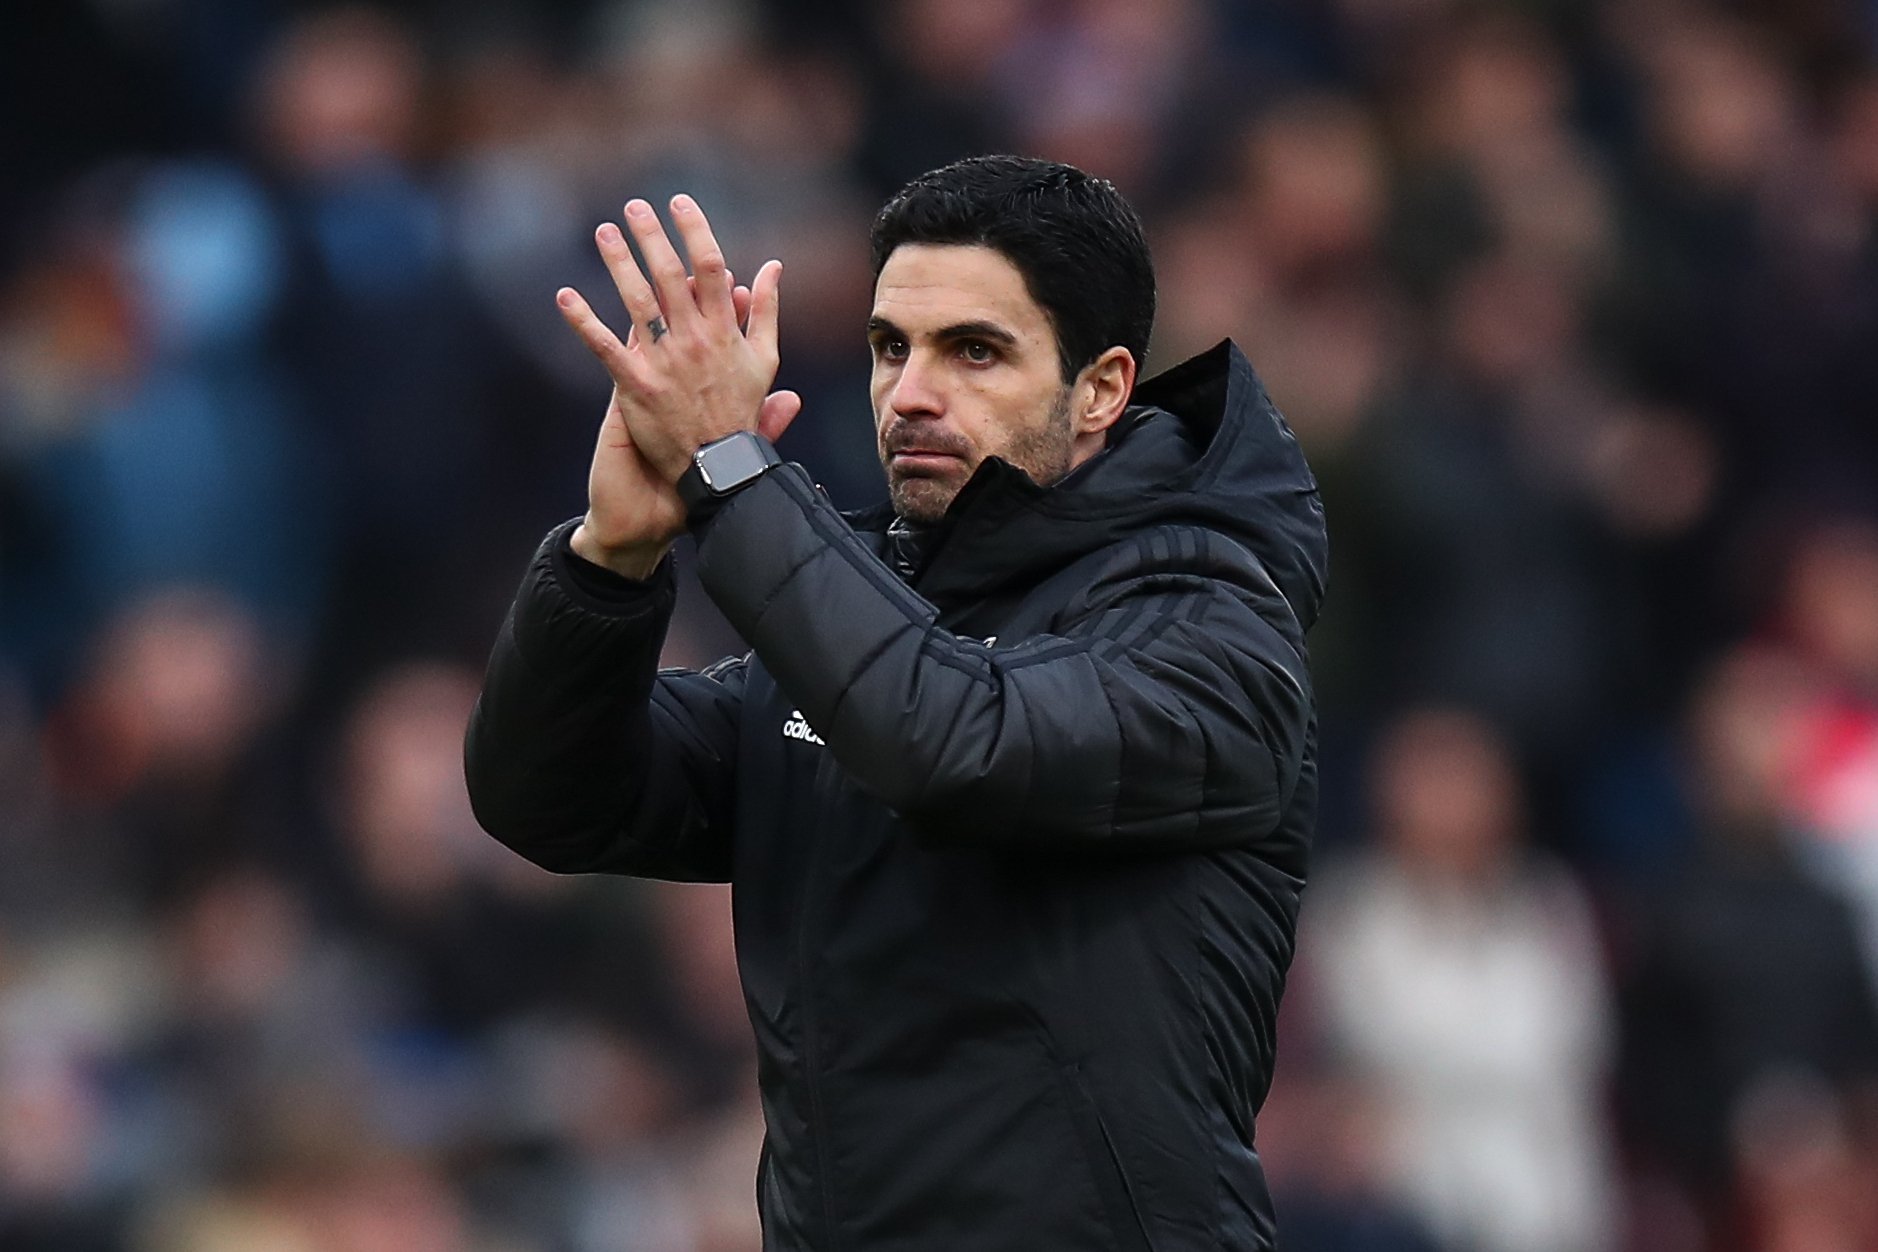 While his team is winning, Mikel Arteta, the manager of Arsenal, rarely changes his appearance. – AmazingUnitedState.Com